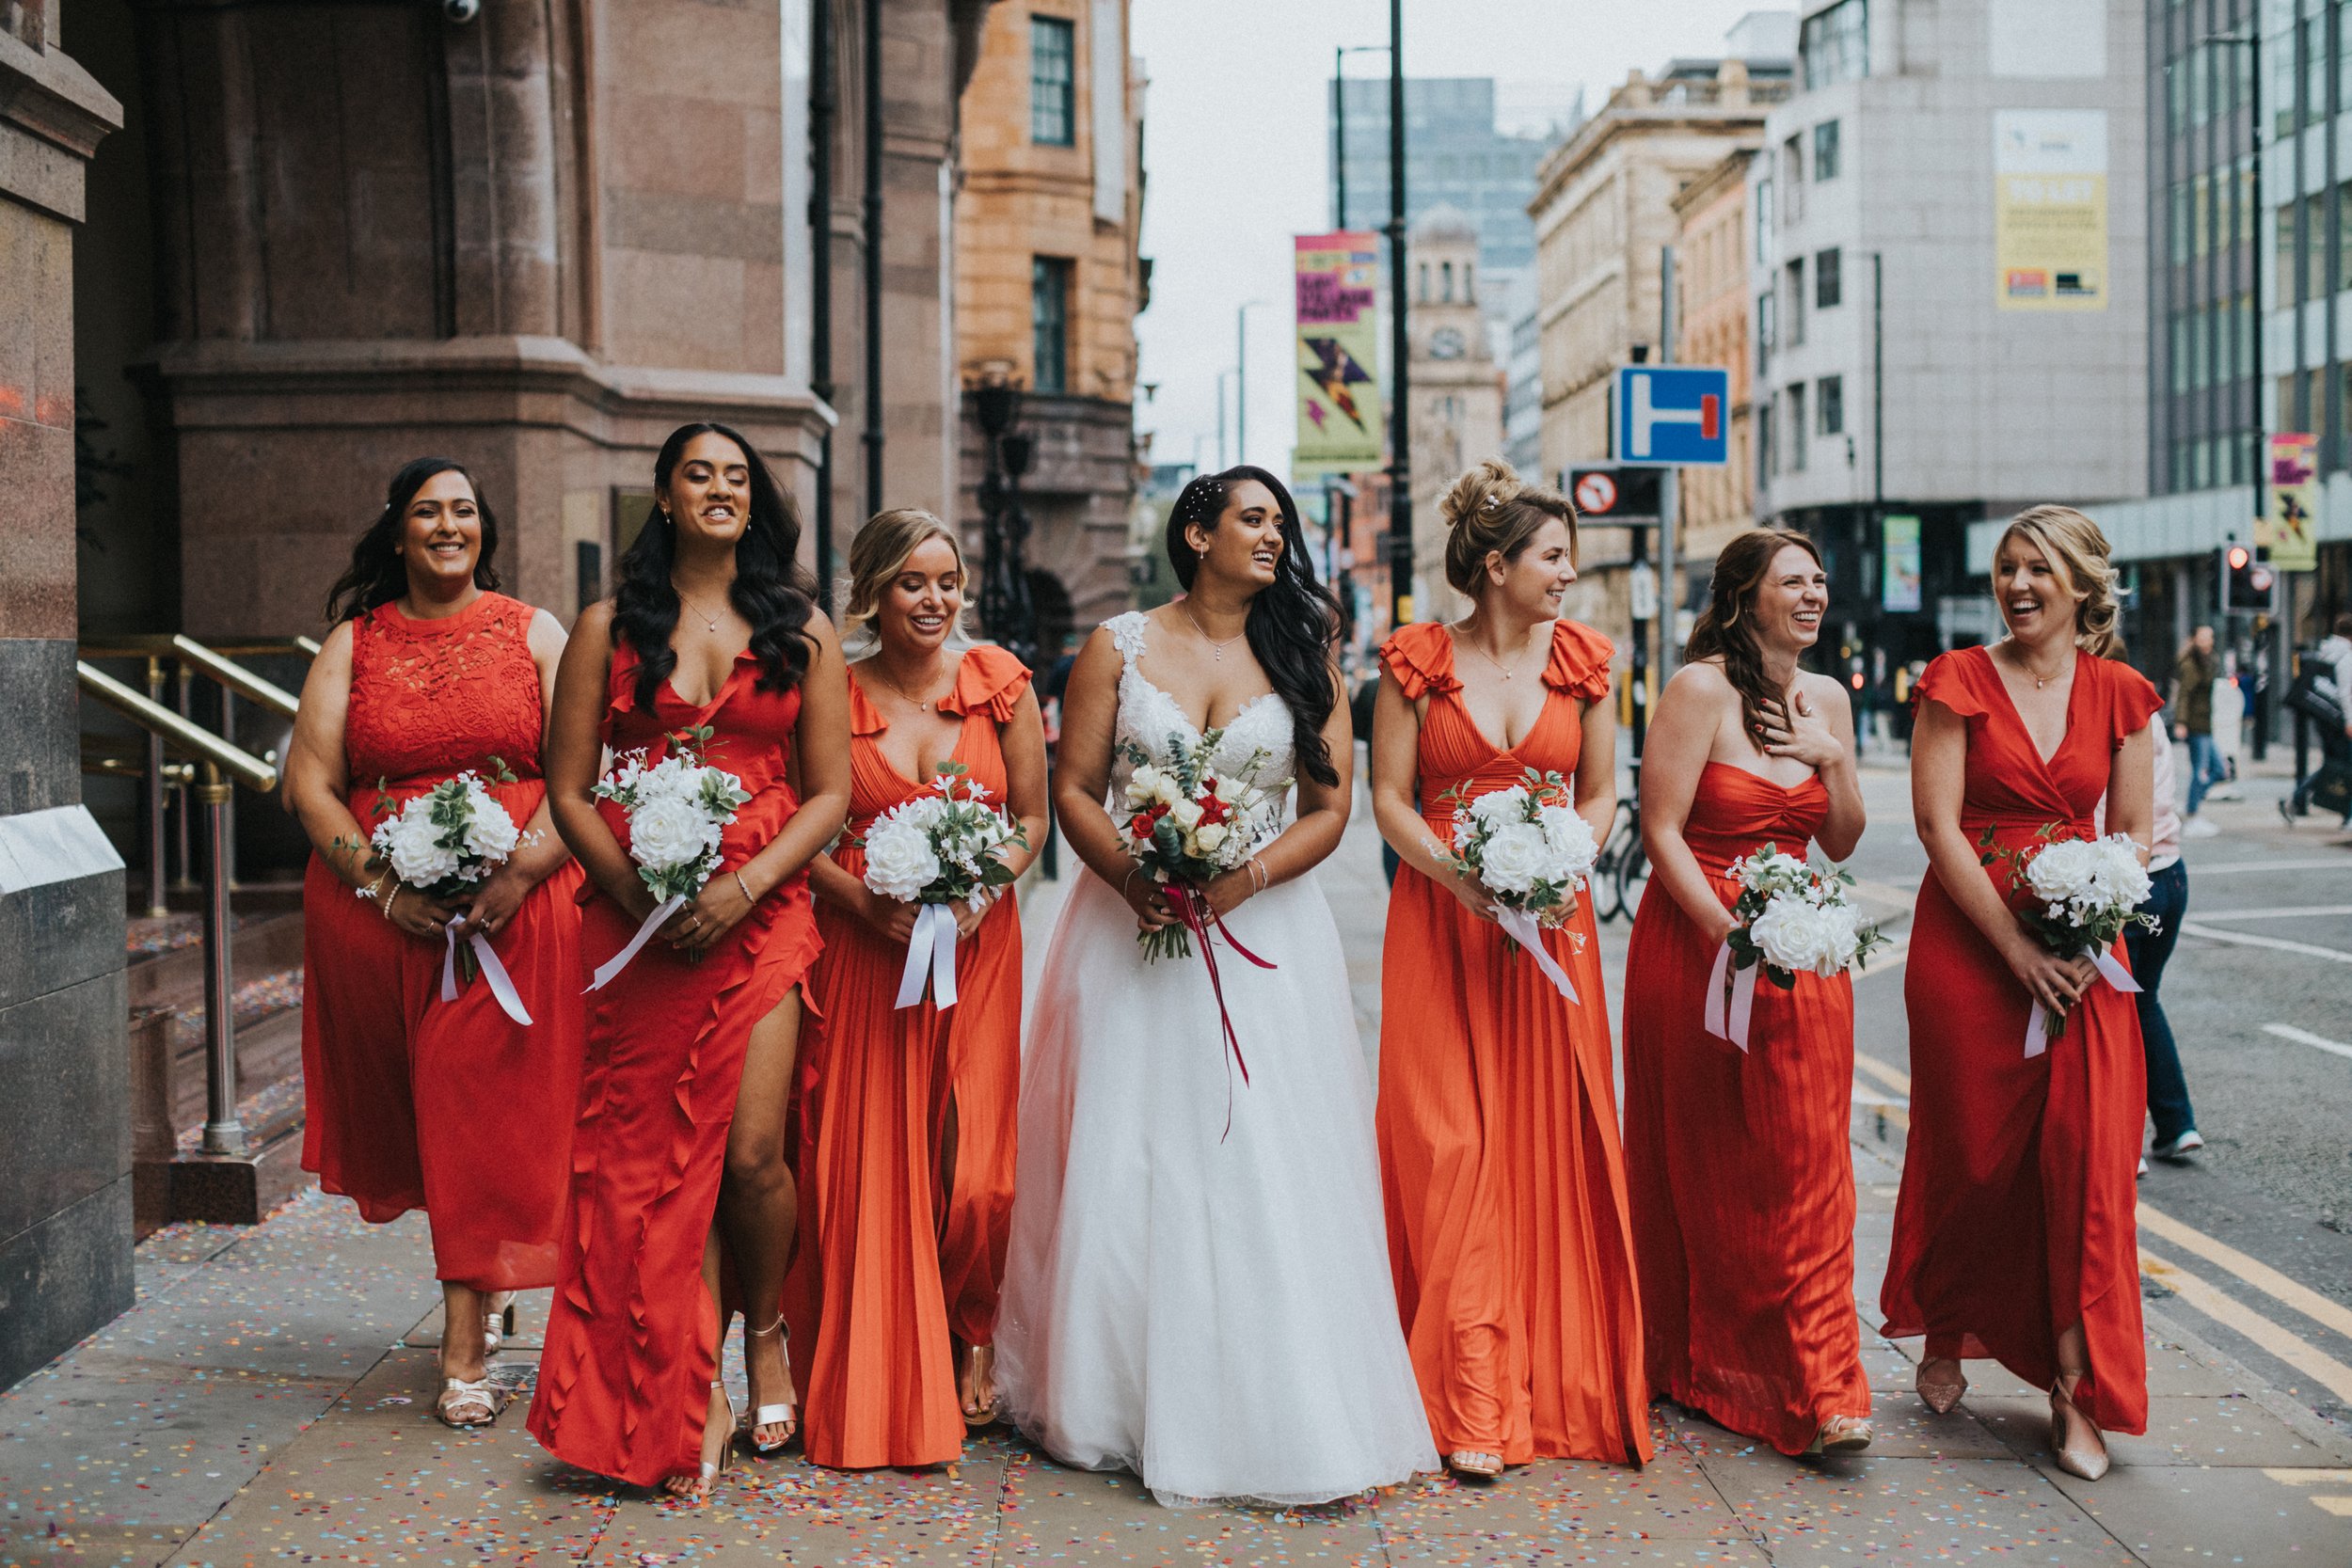 Bride and Bridesmaids walk down the street together. 